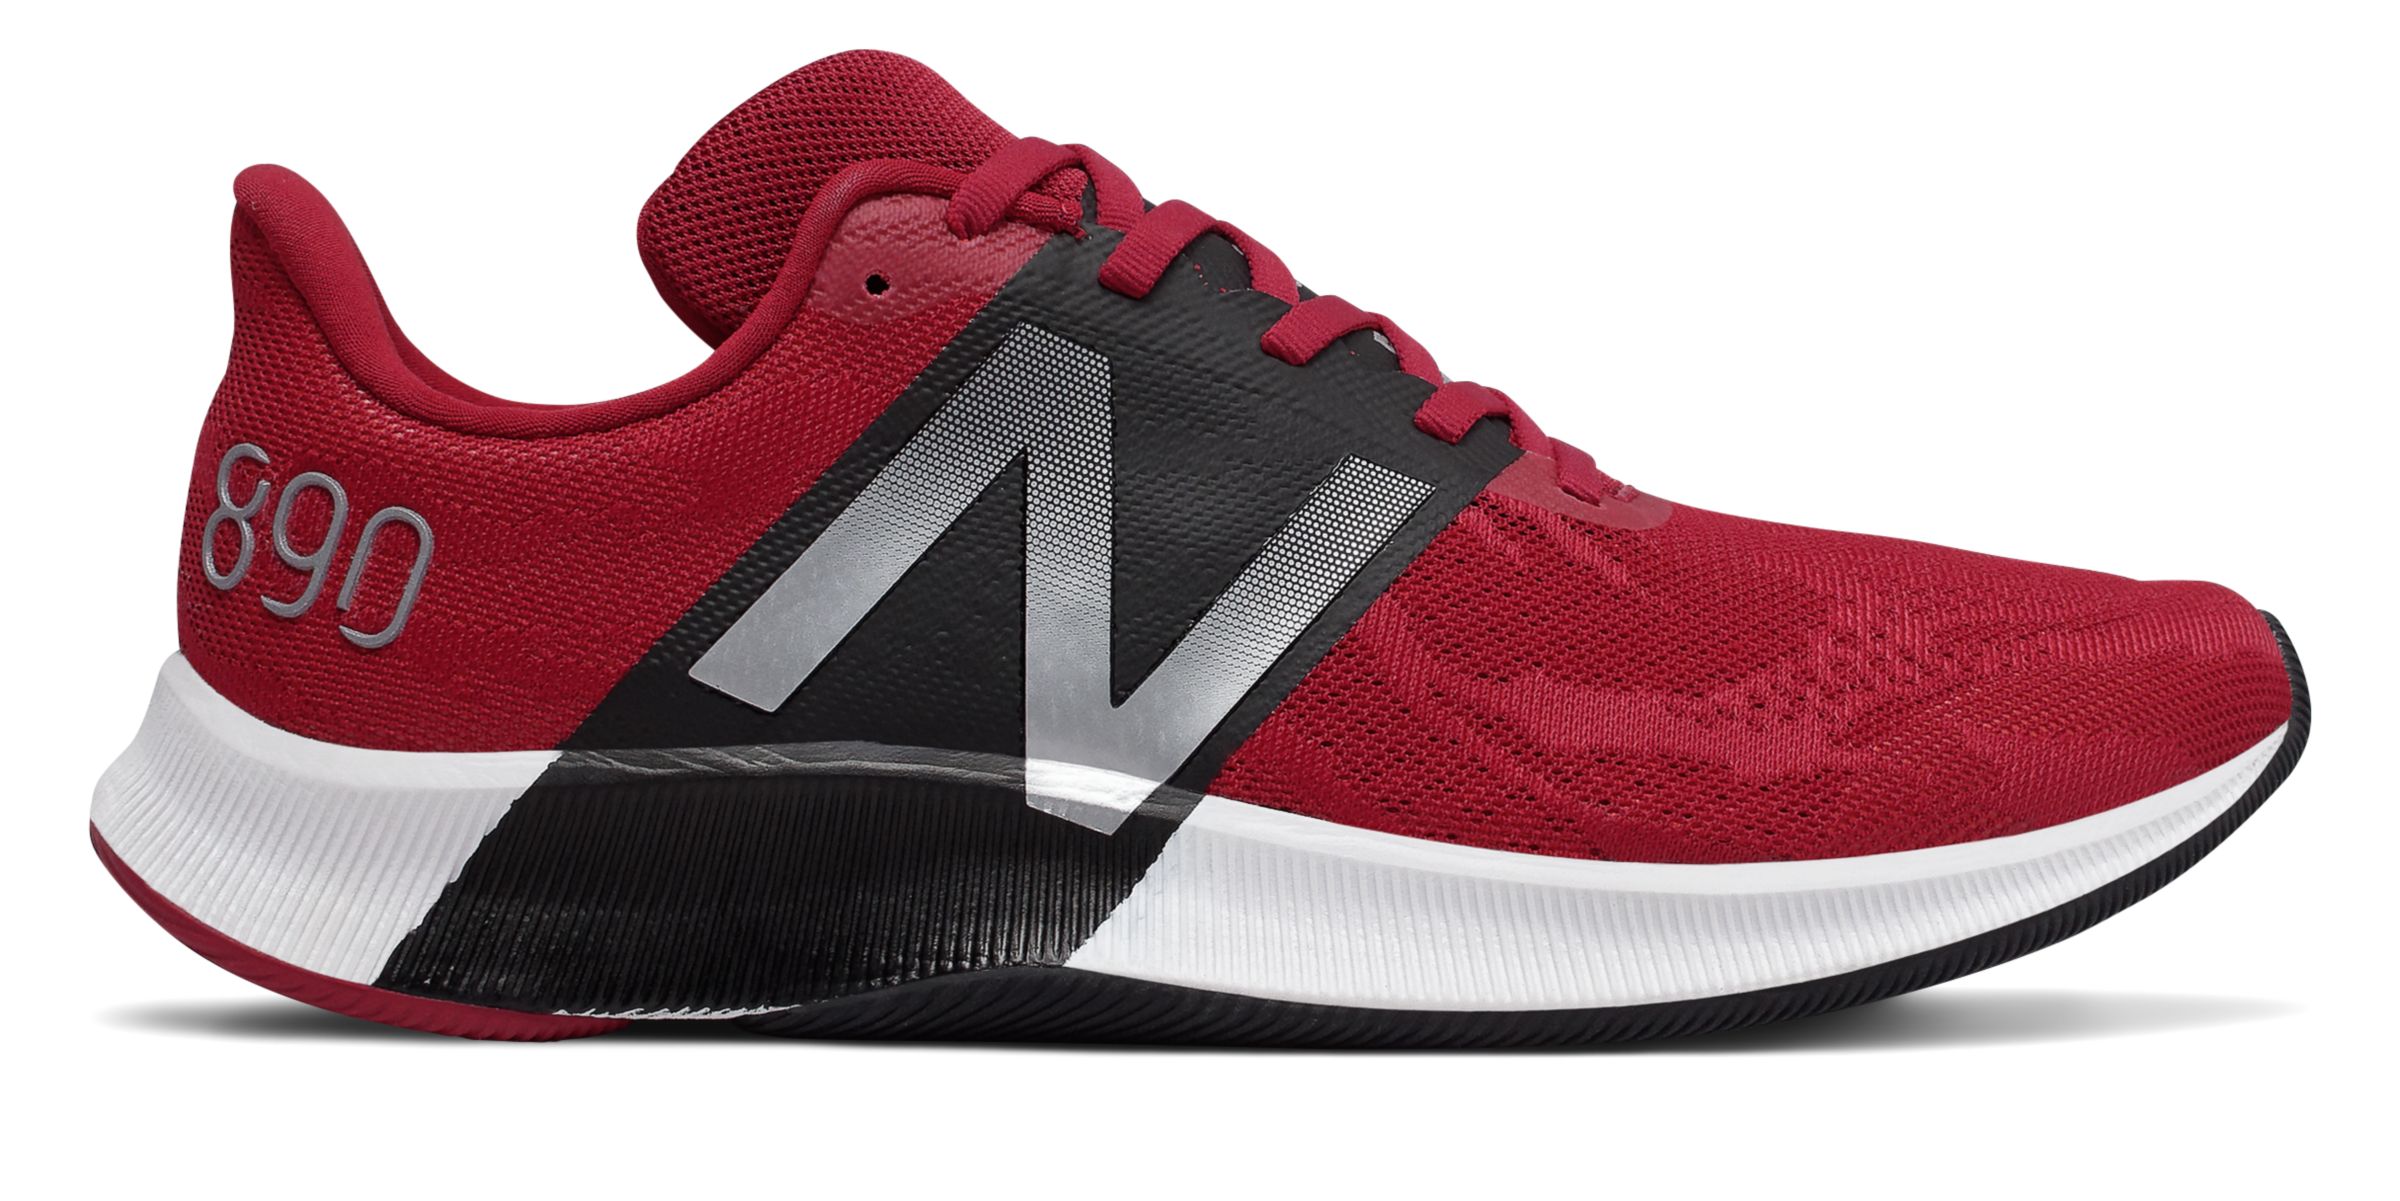 New Balance FuelCell 890 v8